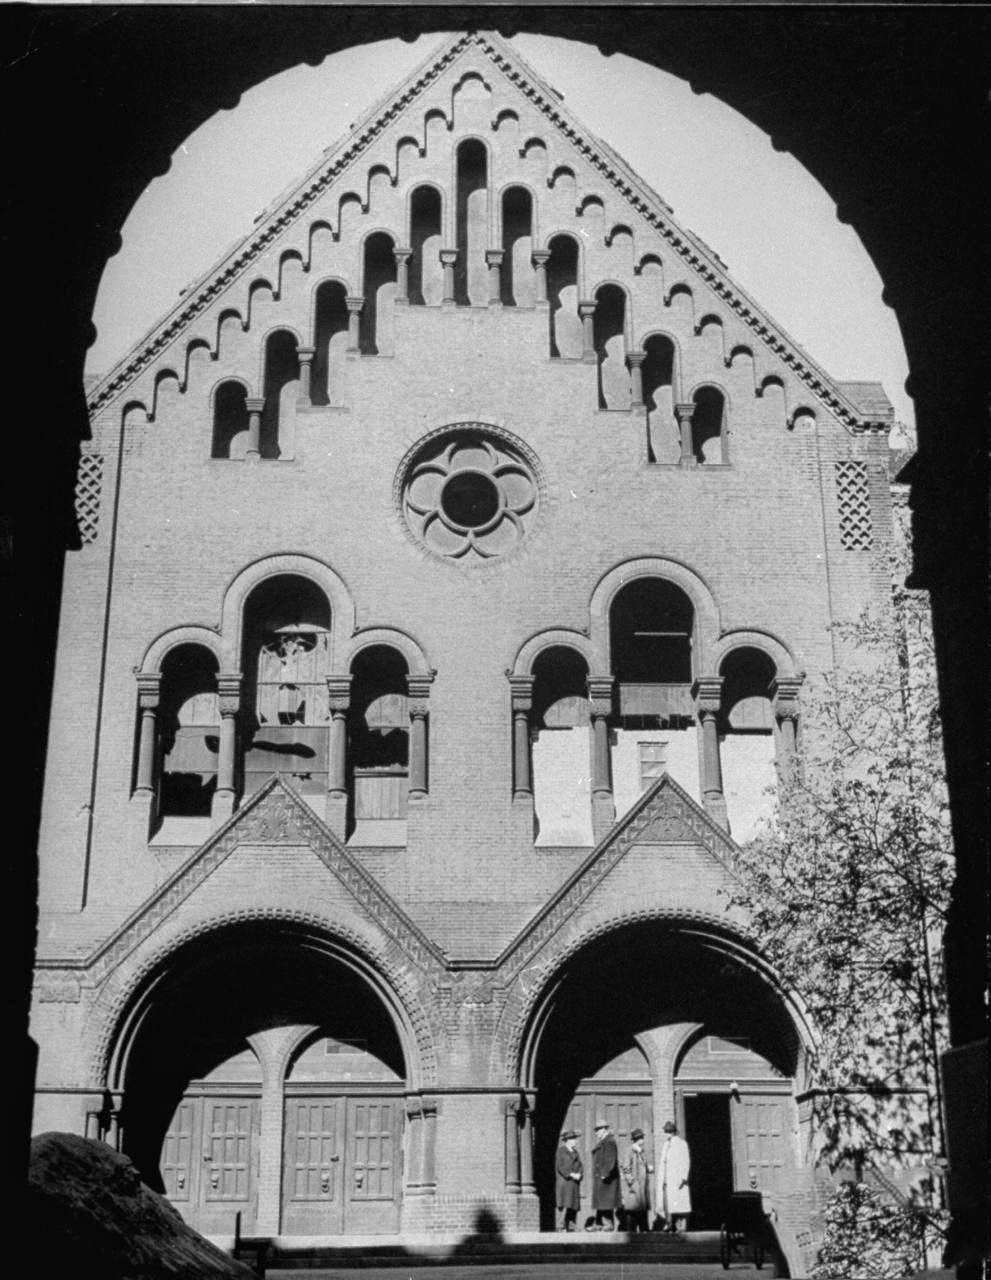 Exterior of a Berlin synagogue during Passover.